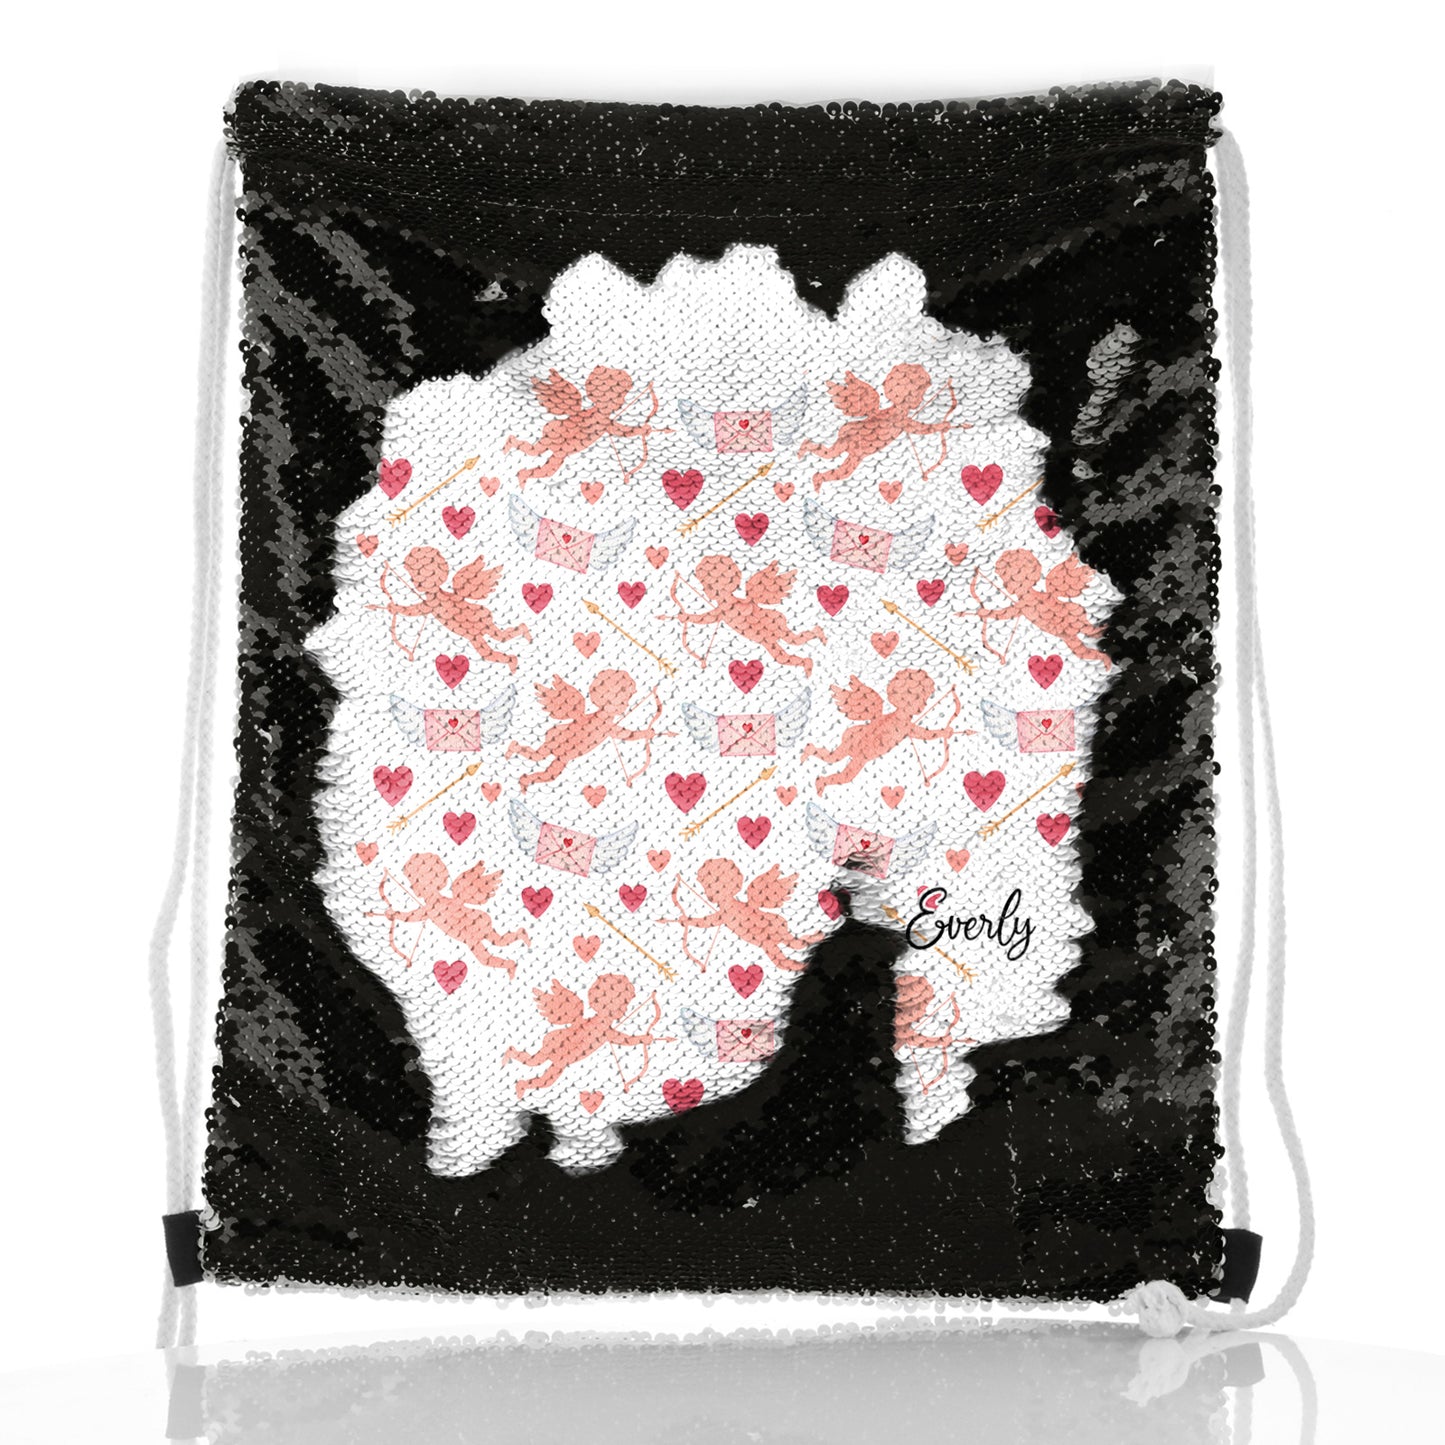 Personalised Sequin Drawstring Backpack with Stylish Text and Cupid Hearts Print